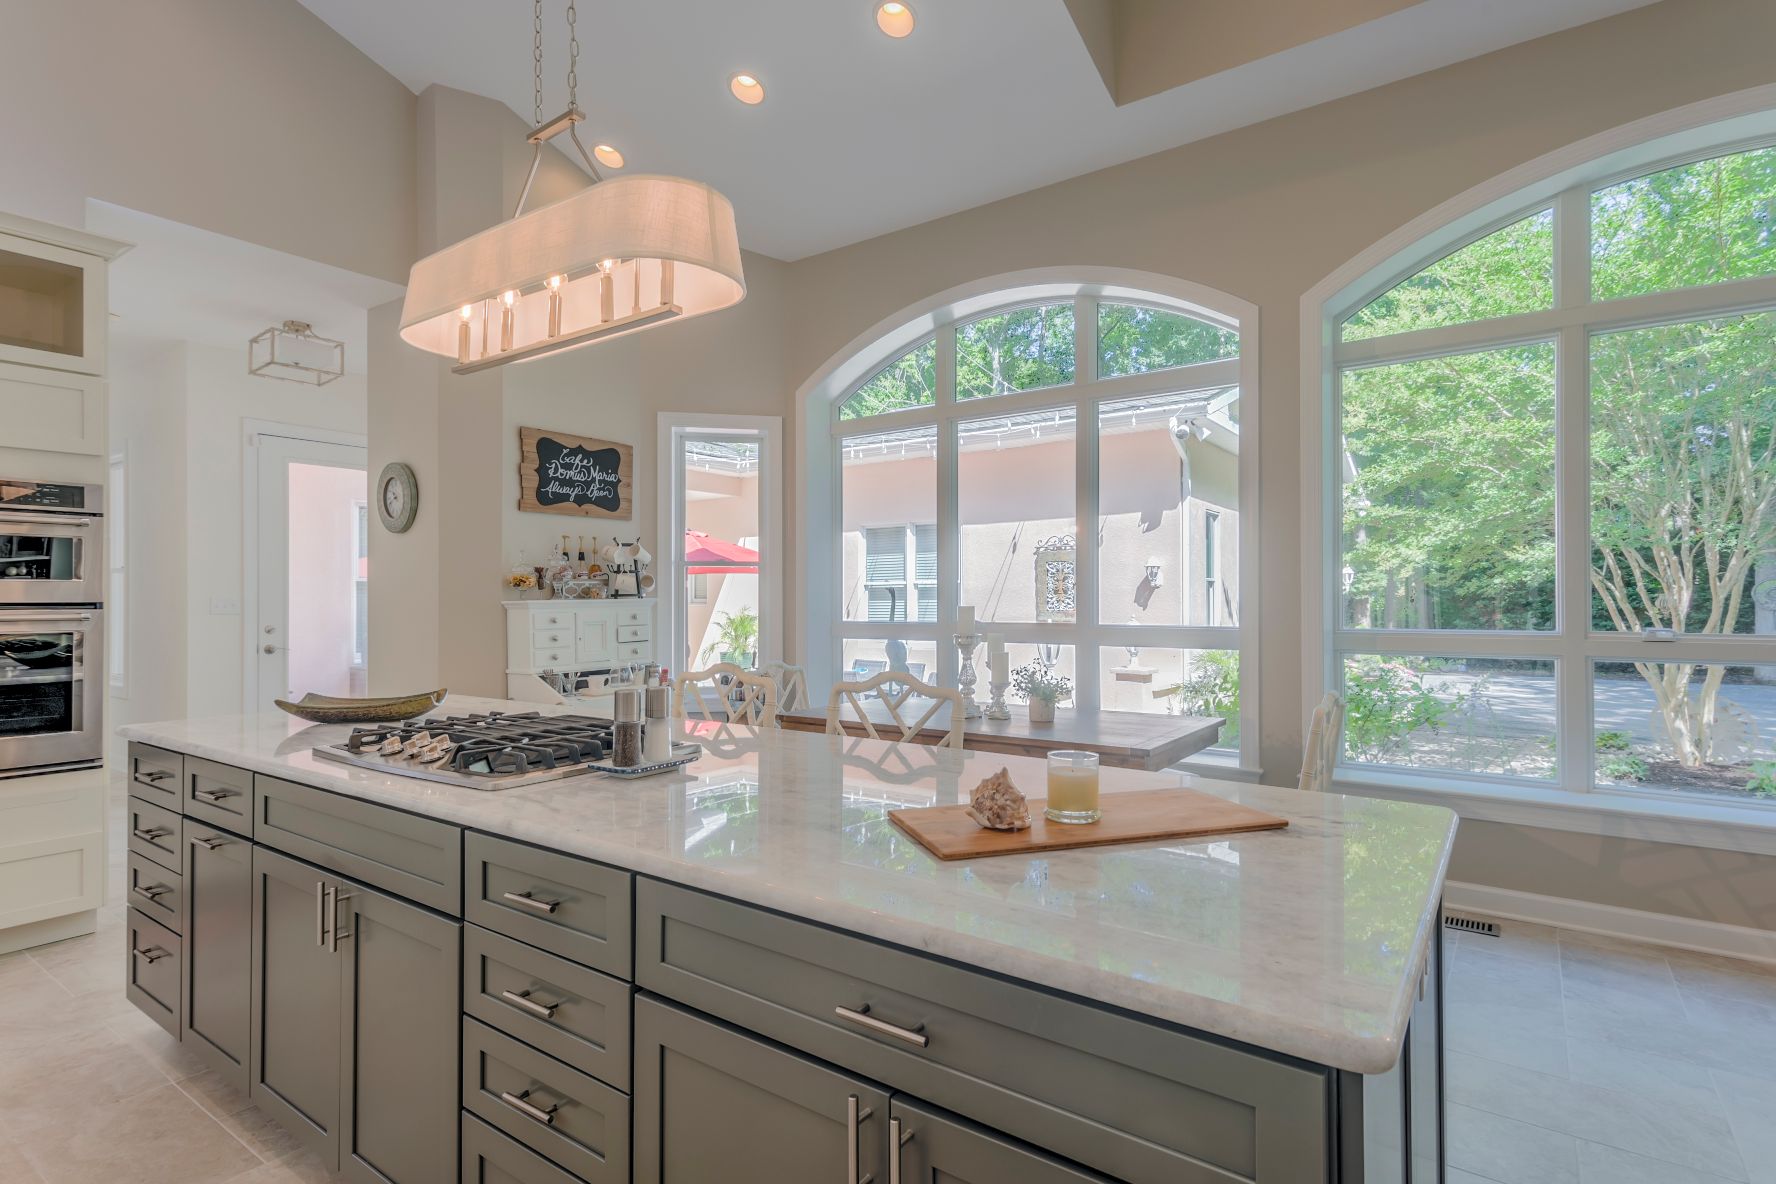 Addition in Juniper Court, Ocean Pines MD - Kitchen with Center Island and Vintage Lights